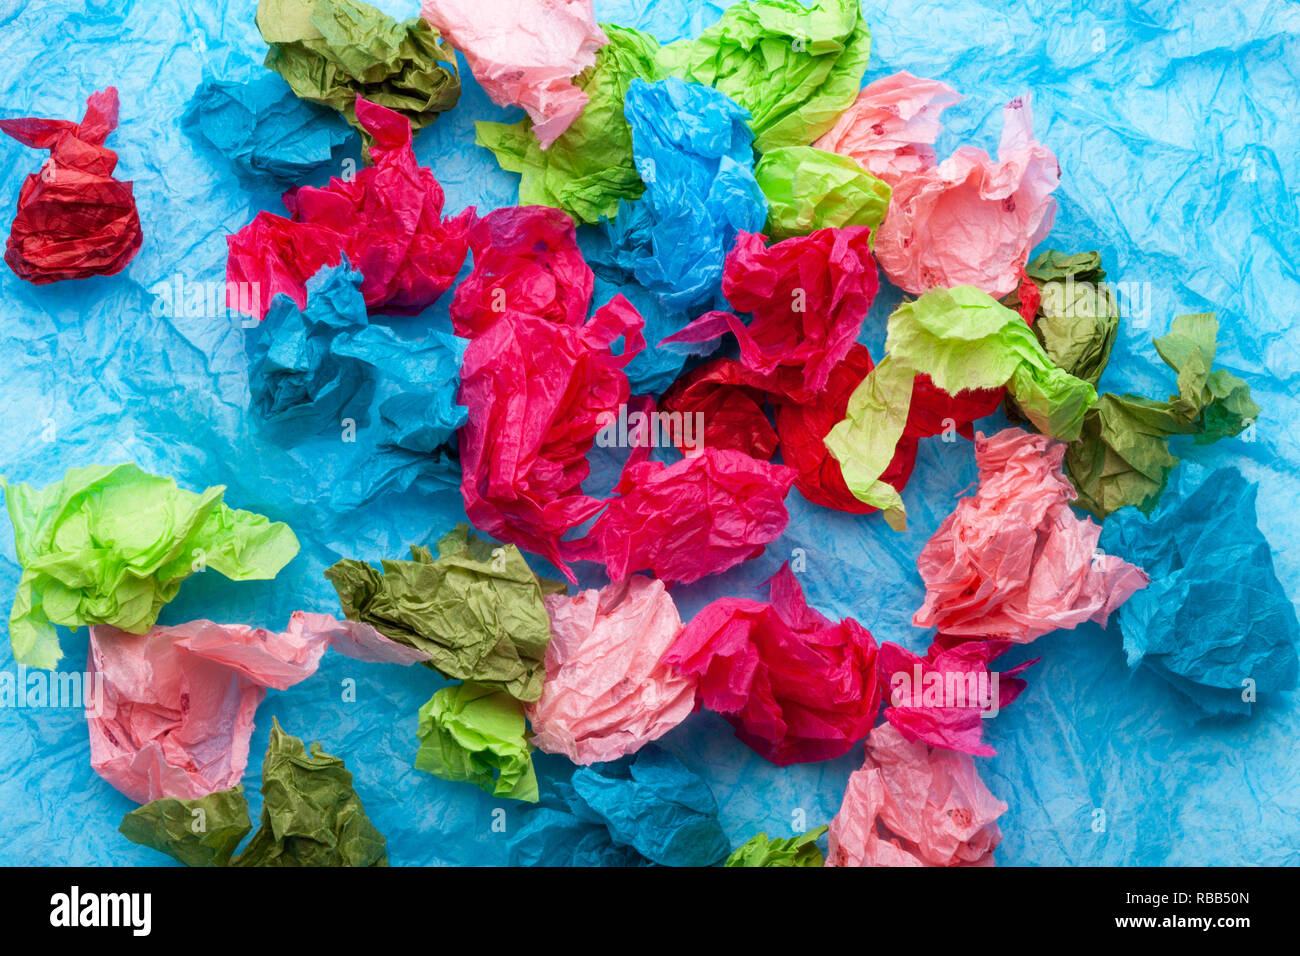 Crumpled colorful tissue paper on a blue tissue paper background Stock Photo